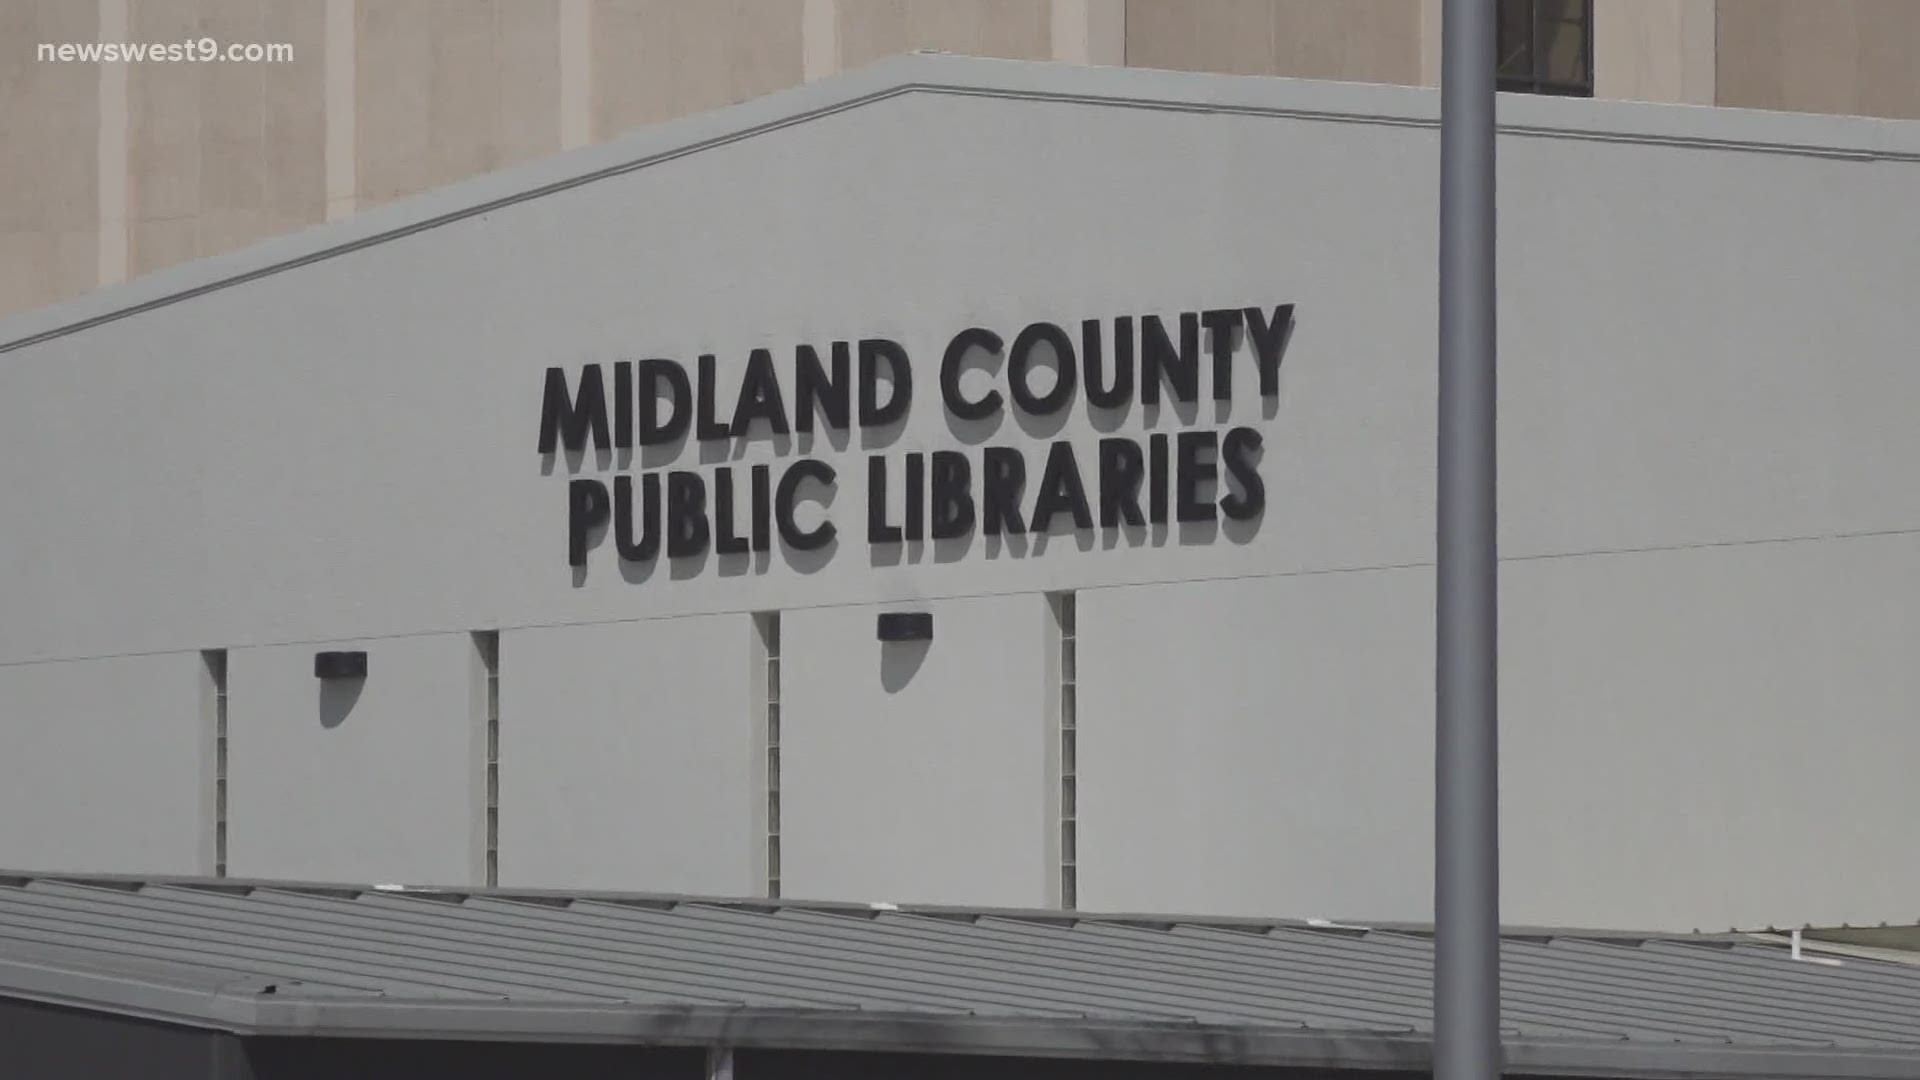 The decision was all in an effort to streamline. Restructuring will save Midland County around $22,000.